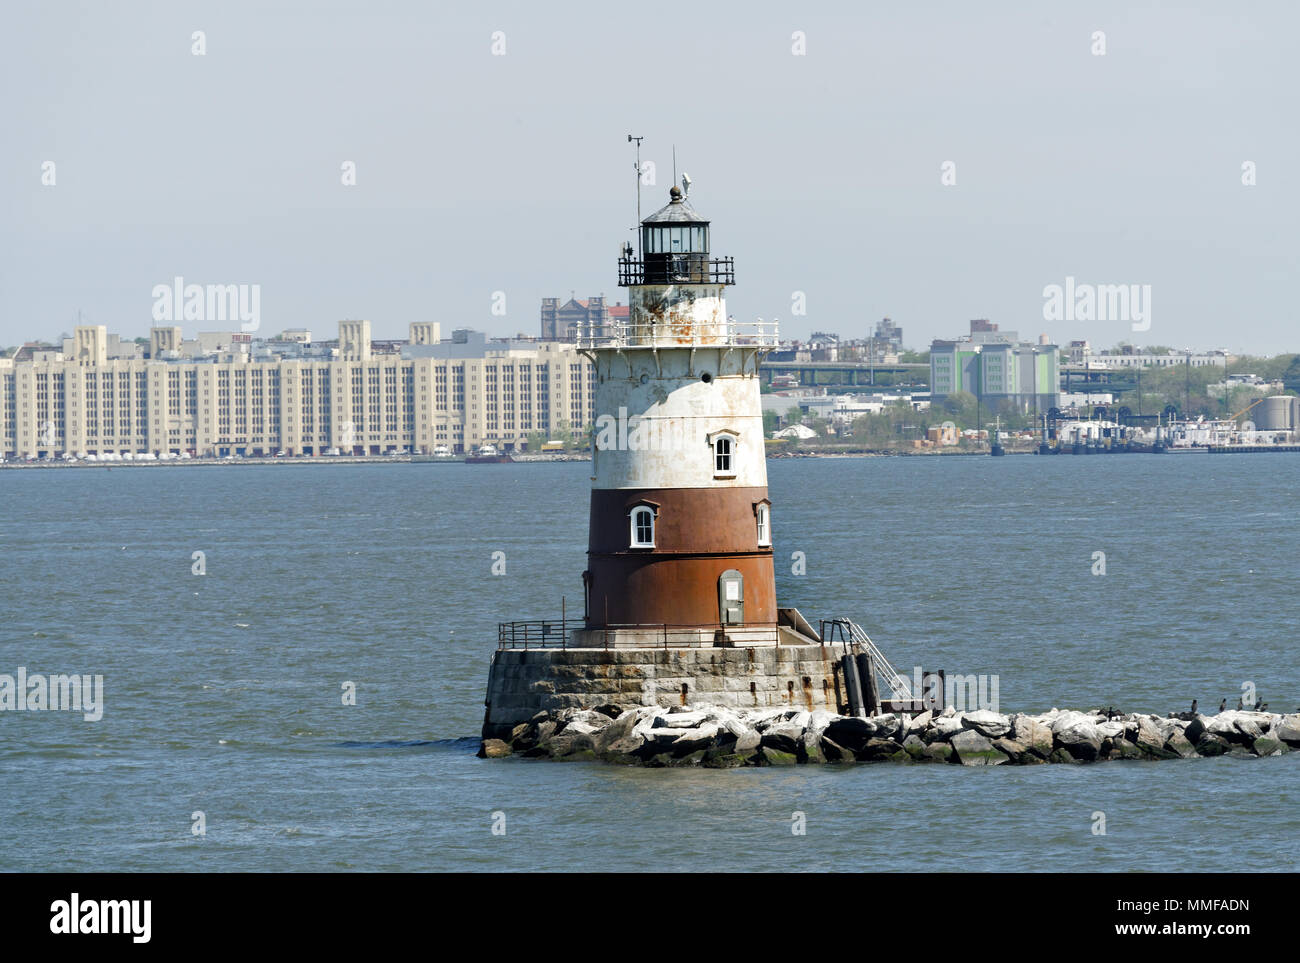 The Robbins Reef Light Station, a sparkplug lighthouse in Upper New York Bay, was built in 1883 and automated in 1966. It is no longer functional. Stock Photo